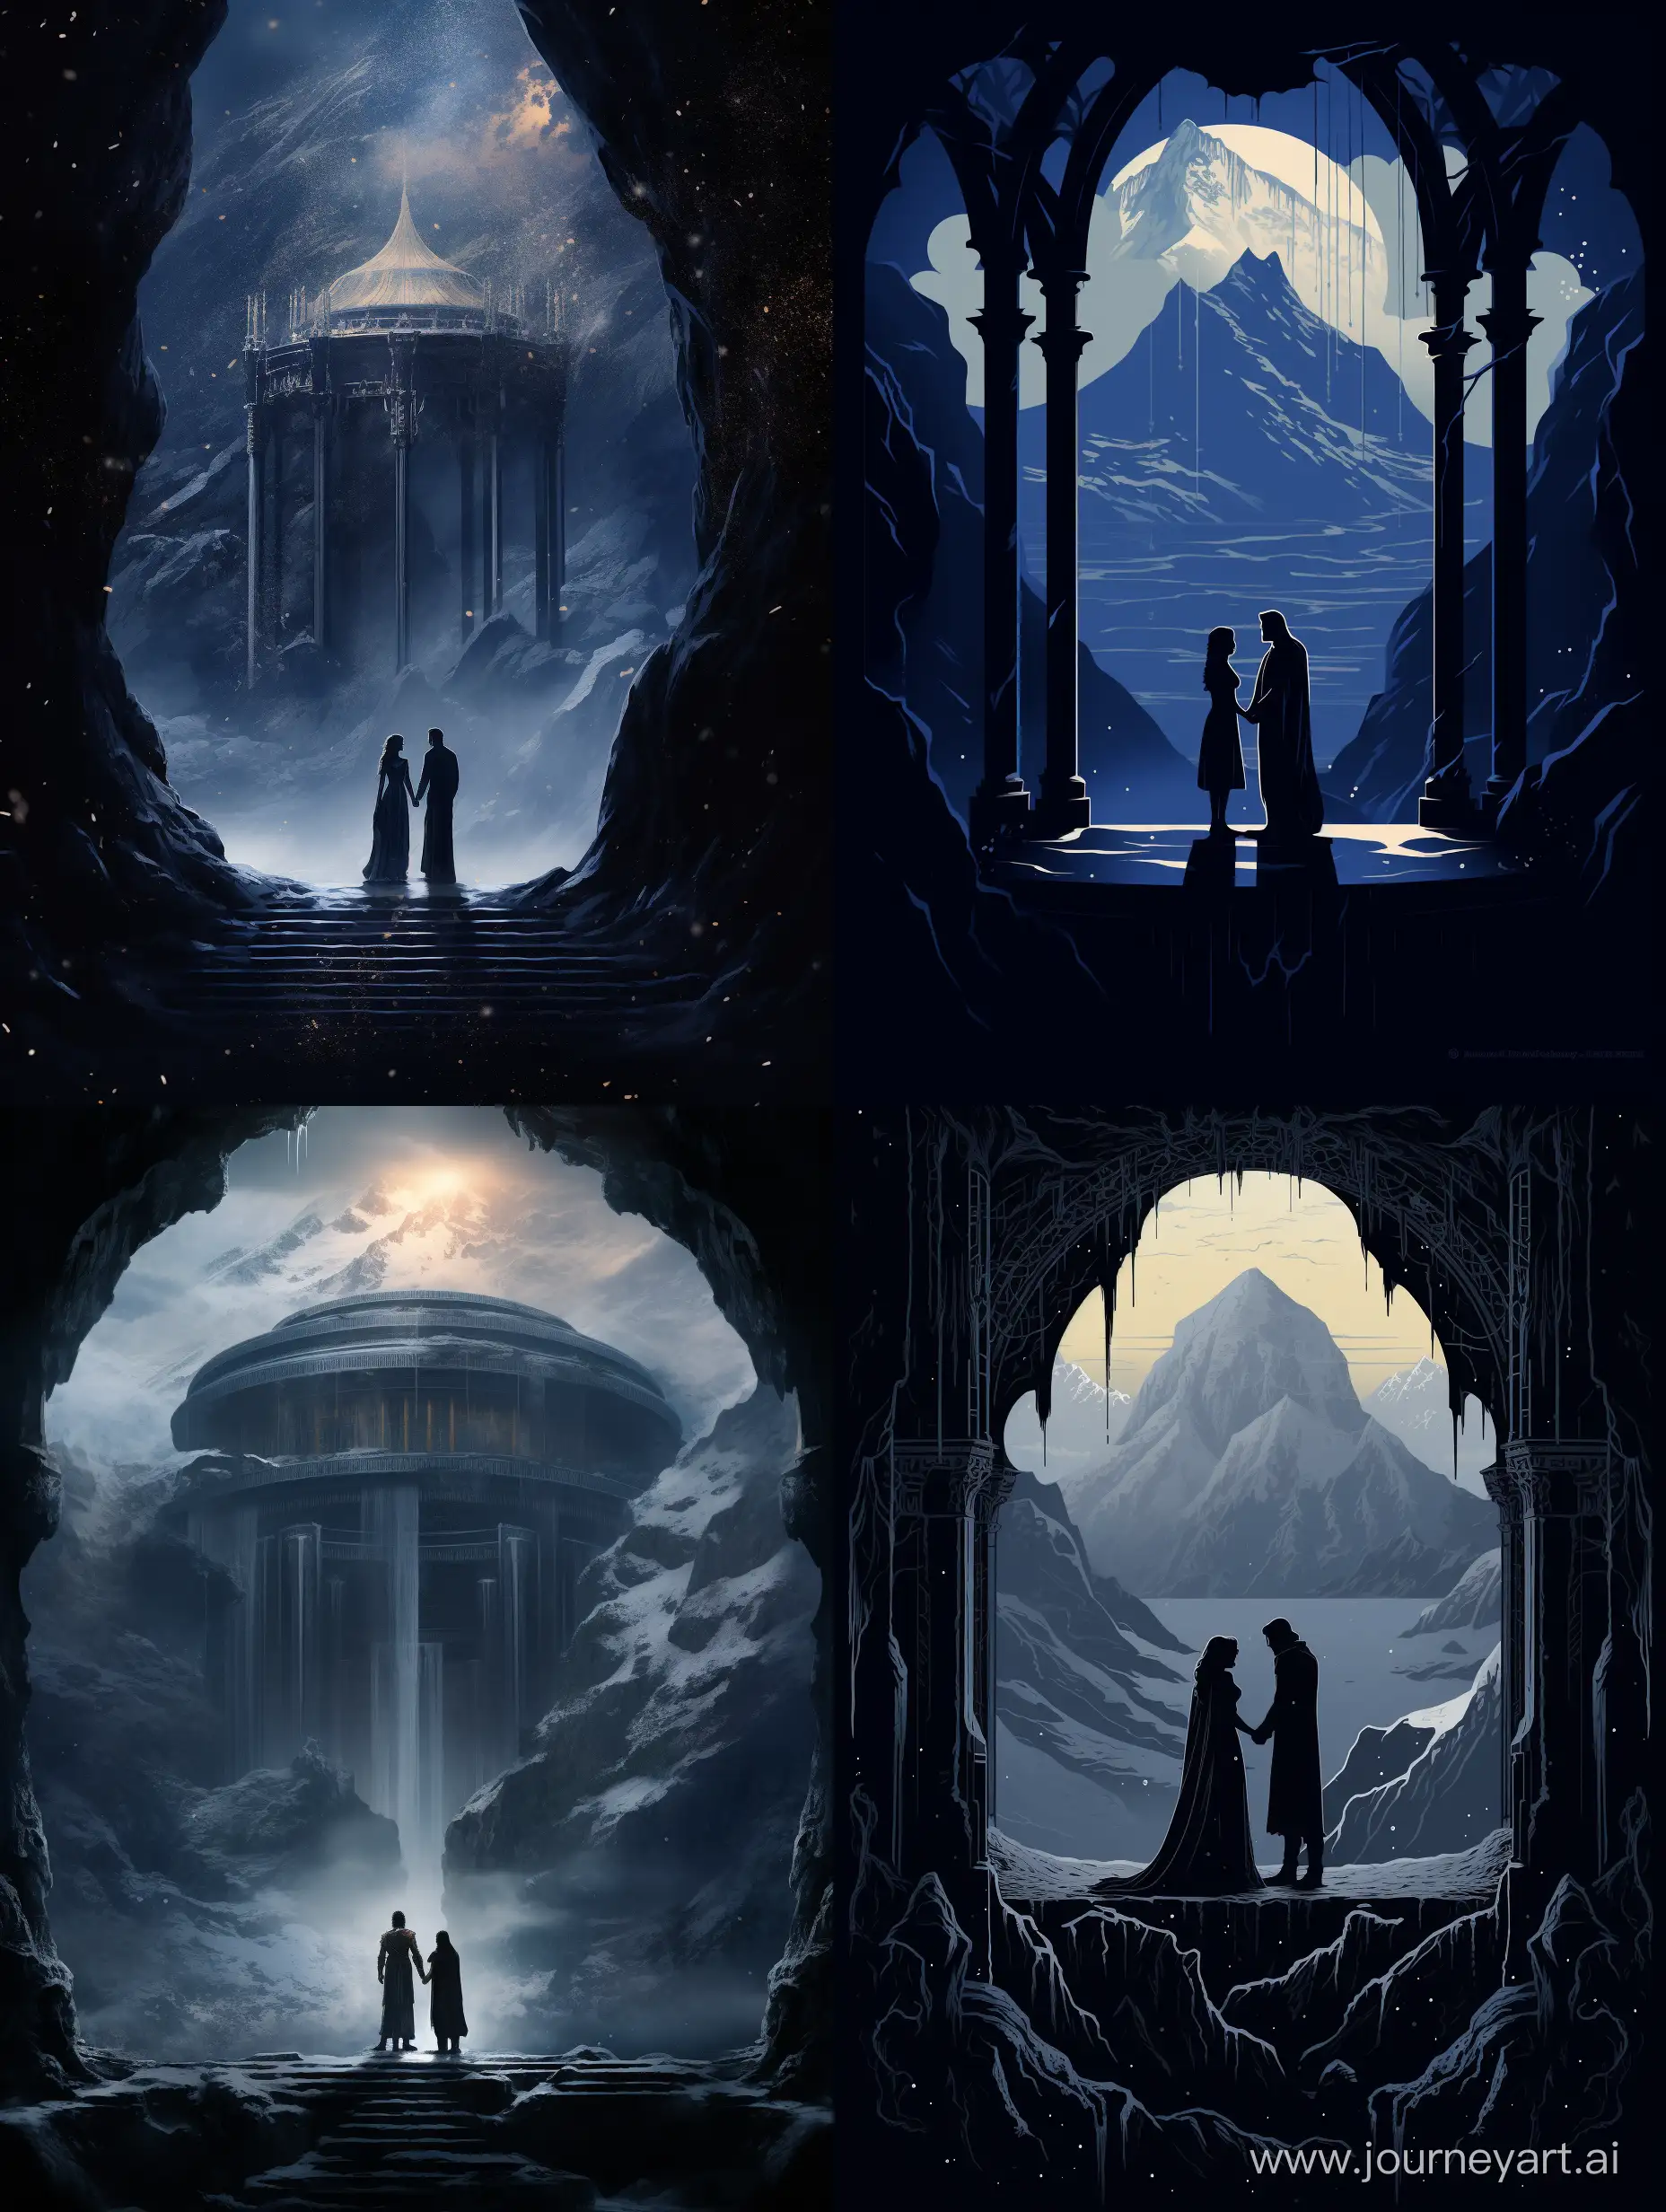 A small temple with columns and a dome stands on top of a mountain in the middle of icy mountains. Inside the temple there are a woman and a man in robes stand close to each other. The tones are are darkish and cold